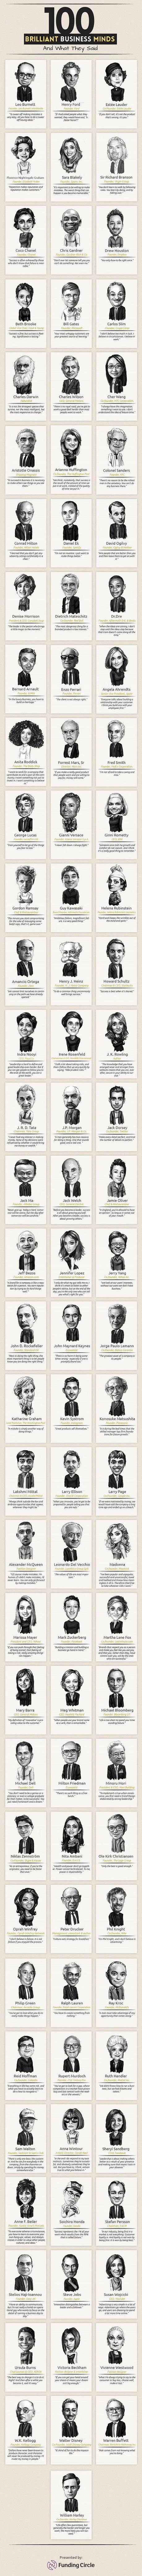 100 Business Quotes from Top Most Successful Business Minds Globally